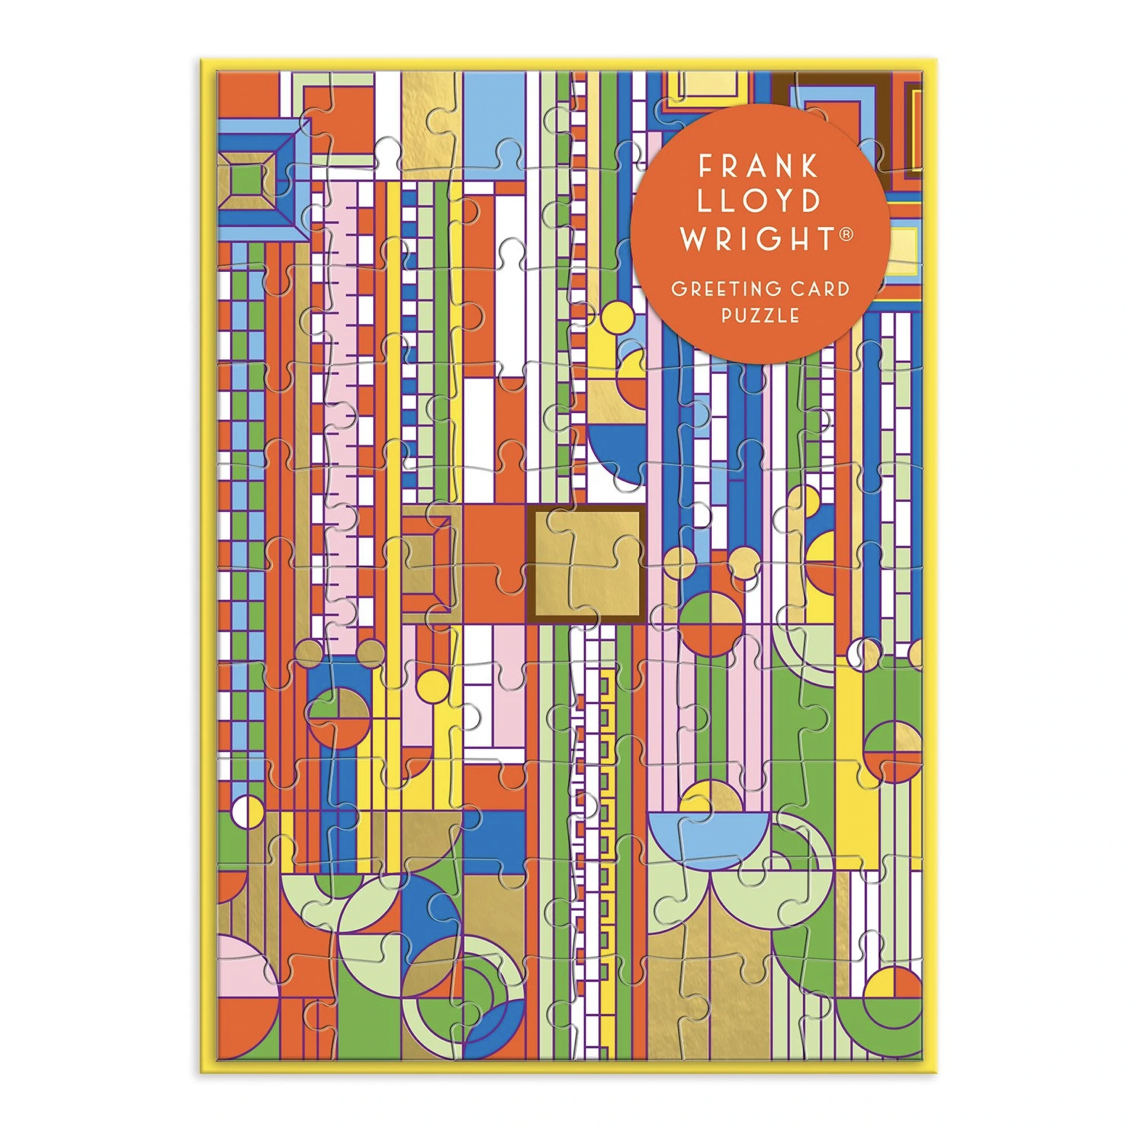 Frank Lloyd Wright, &quot;Saguaro Forms &amp; Cactus&quot; Greeting Card Puzzle